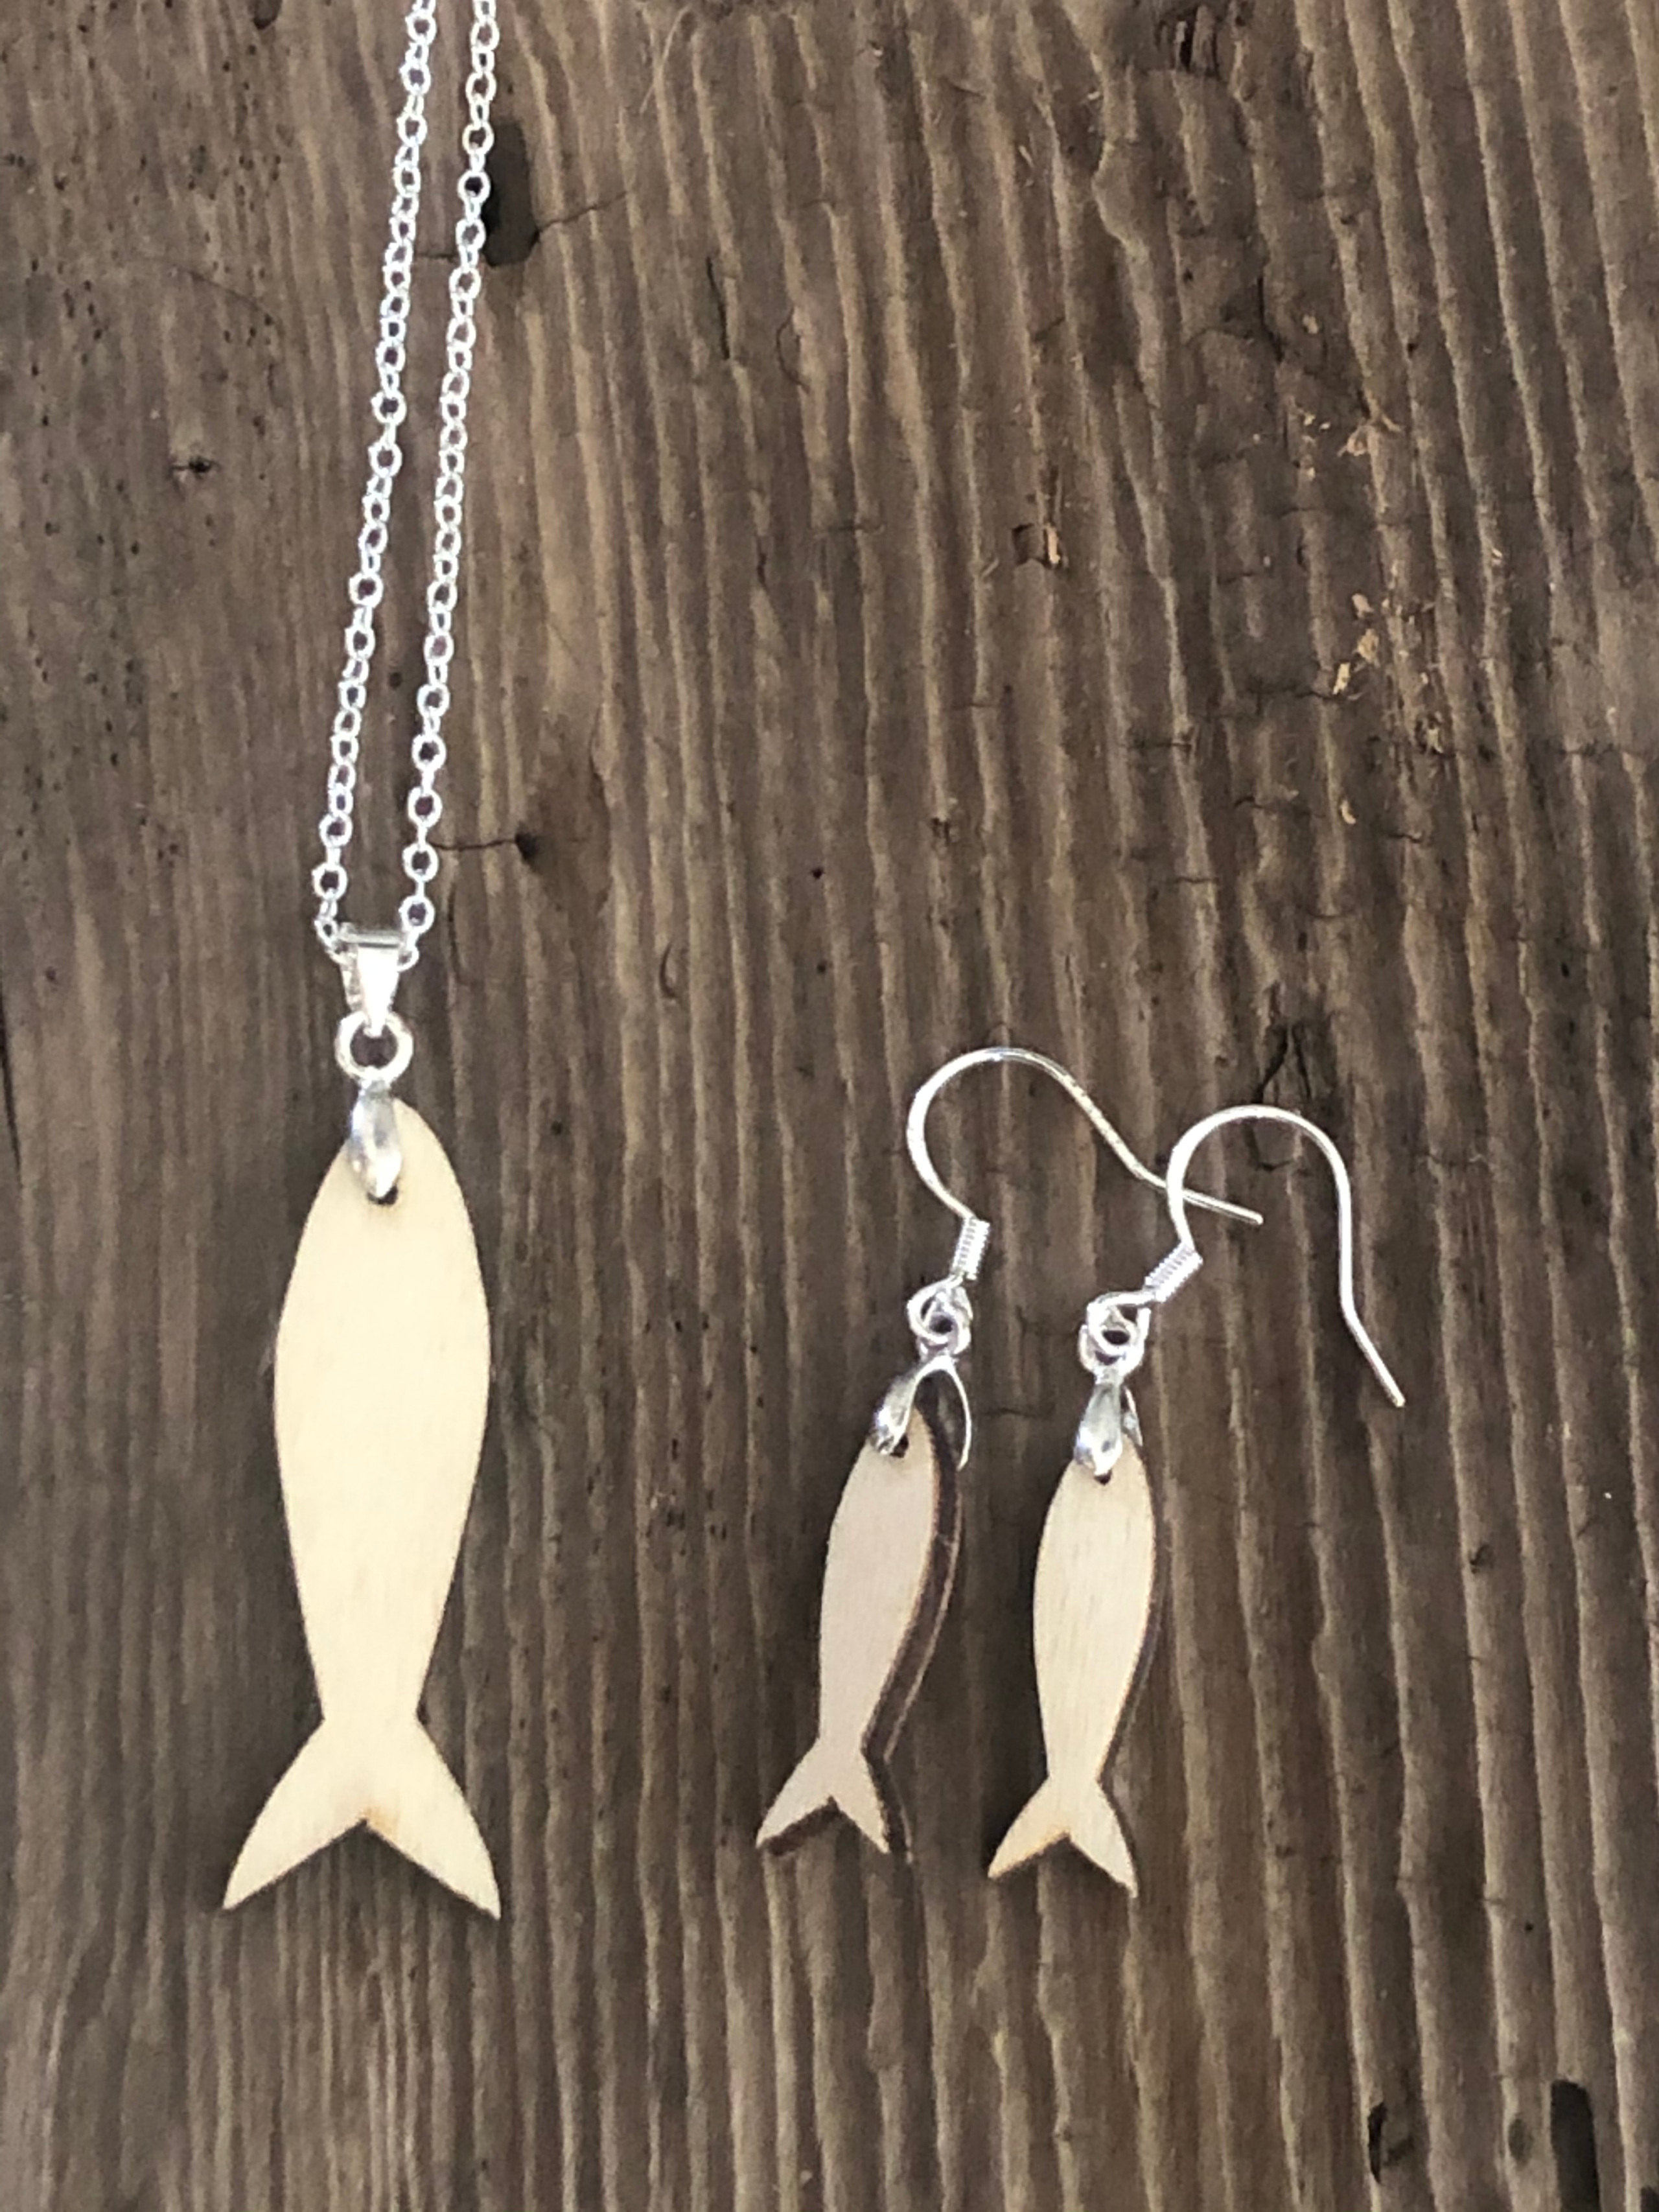 Wooden Fish Earrings & Necklace Set